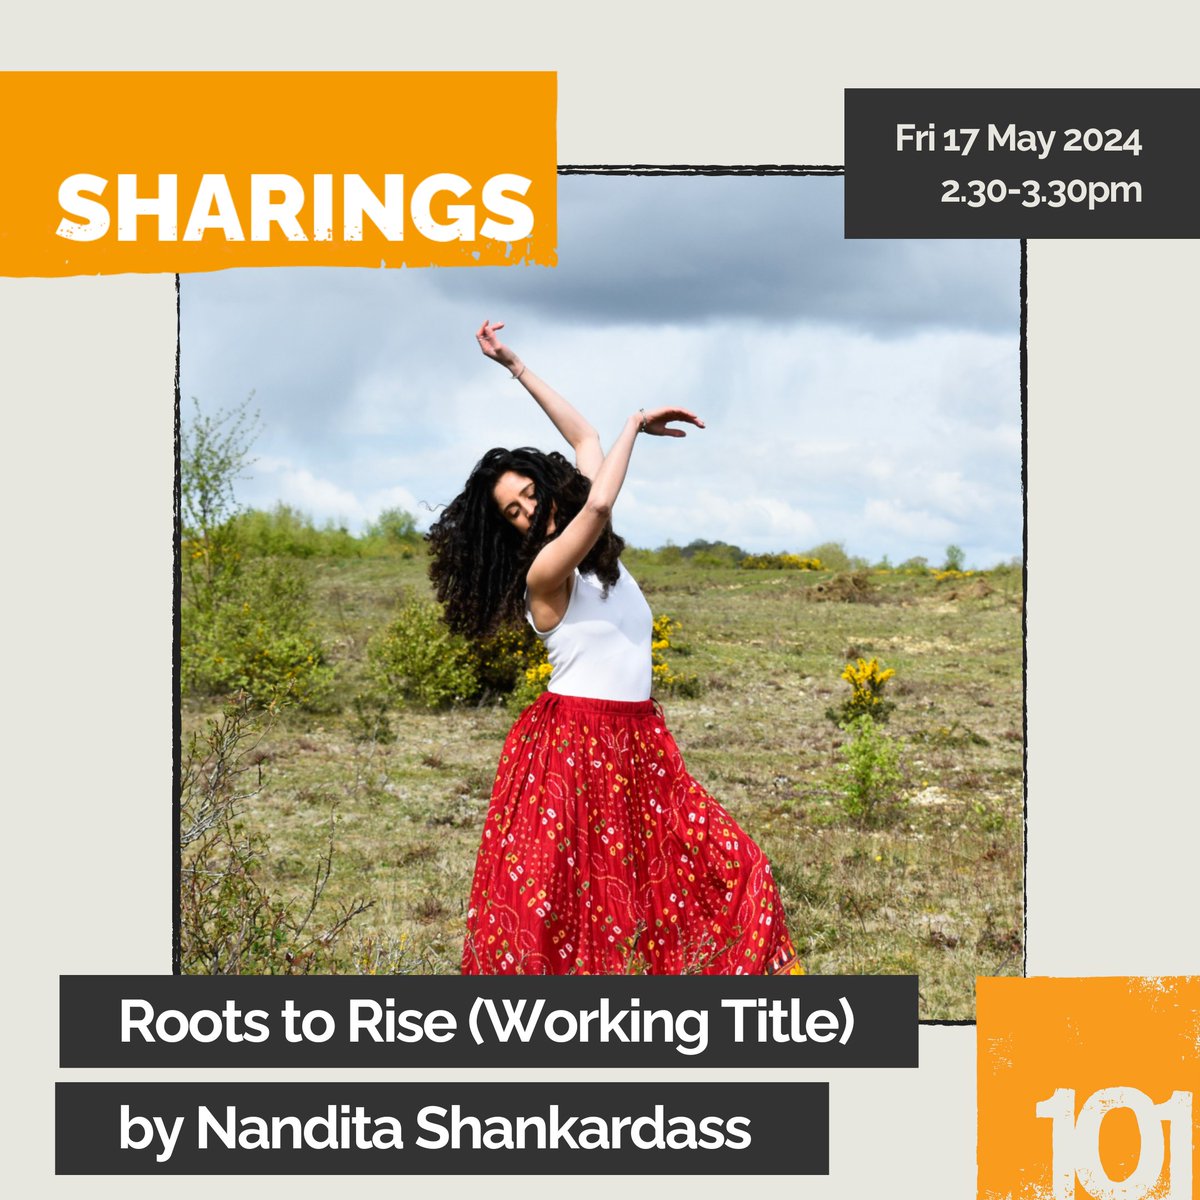 #101Sharing with #Seedbed2024 artist Nandita Shankardass! A new dance work in progress, Roots to Rise (Working Title), Fri 17 May, 2.30-3.30pm 🌱 Exploring ancestry, agriculture, ecological activism & the wisdom of women. 101outdoorarts.com/.../sharing-na…... 📸©Breda Louise Glavin